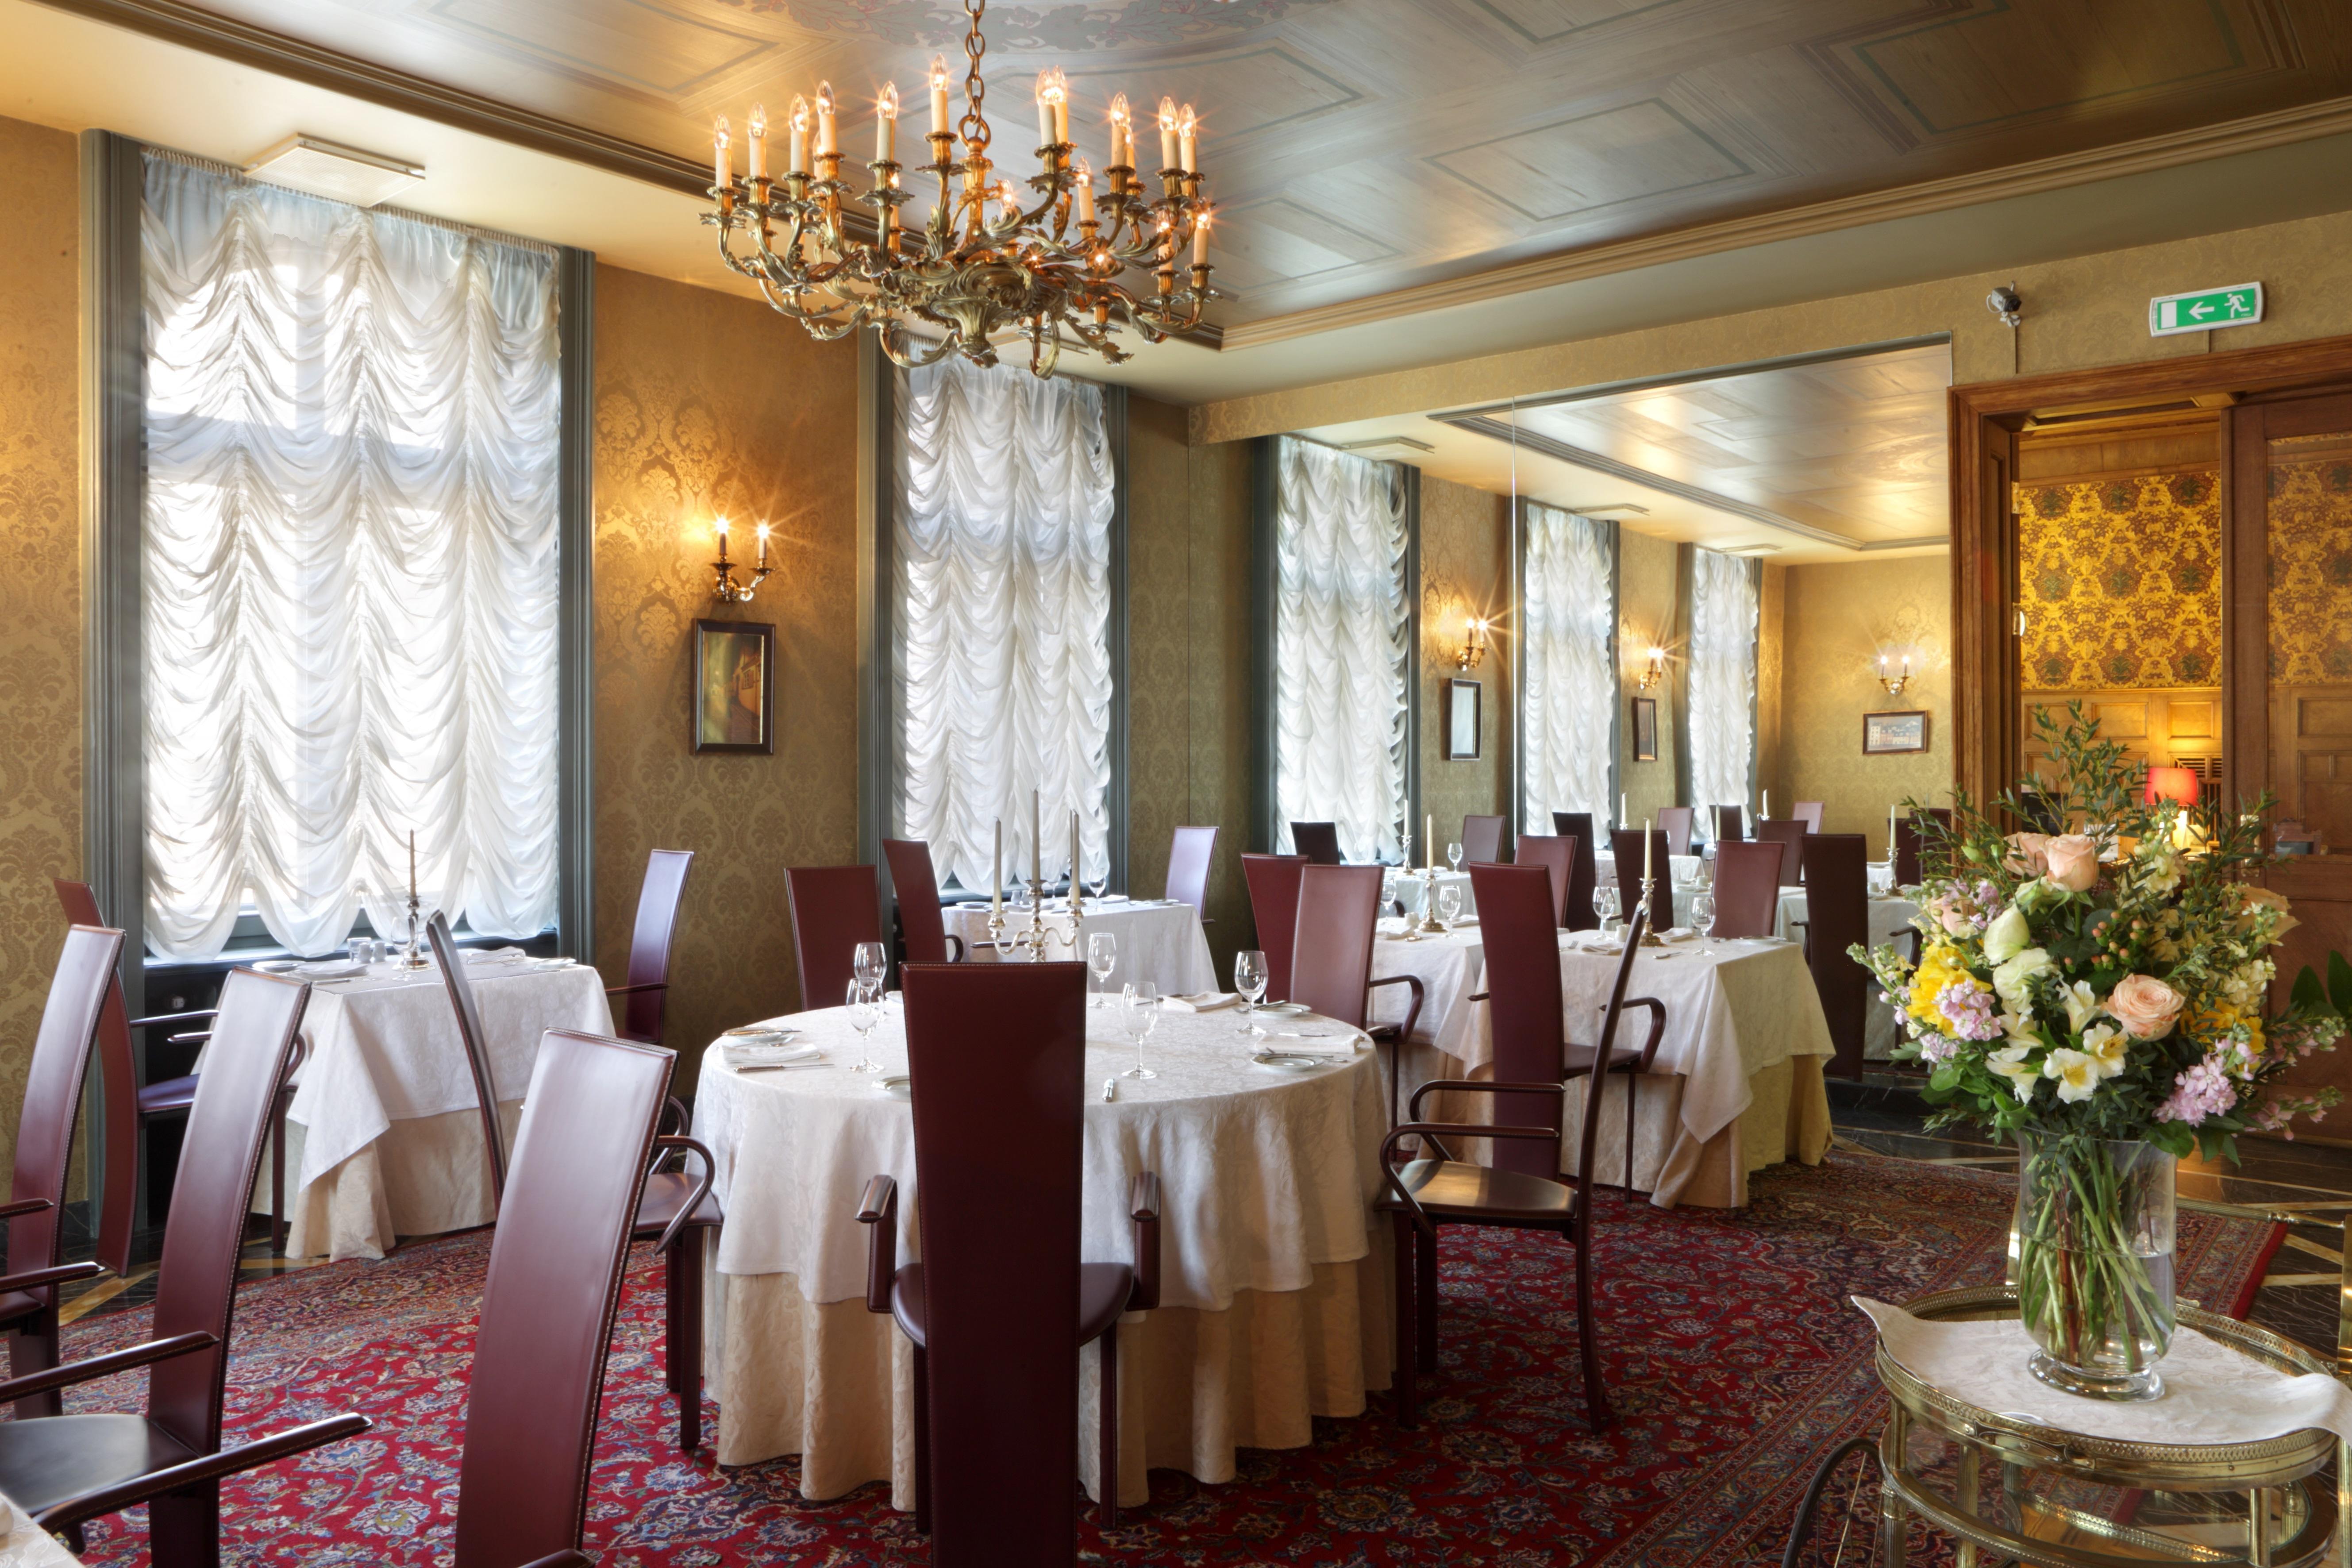 Gallery Park Hotel & Spa, A Chateaux & Hotels Collection Riga Restaurante foto